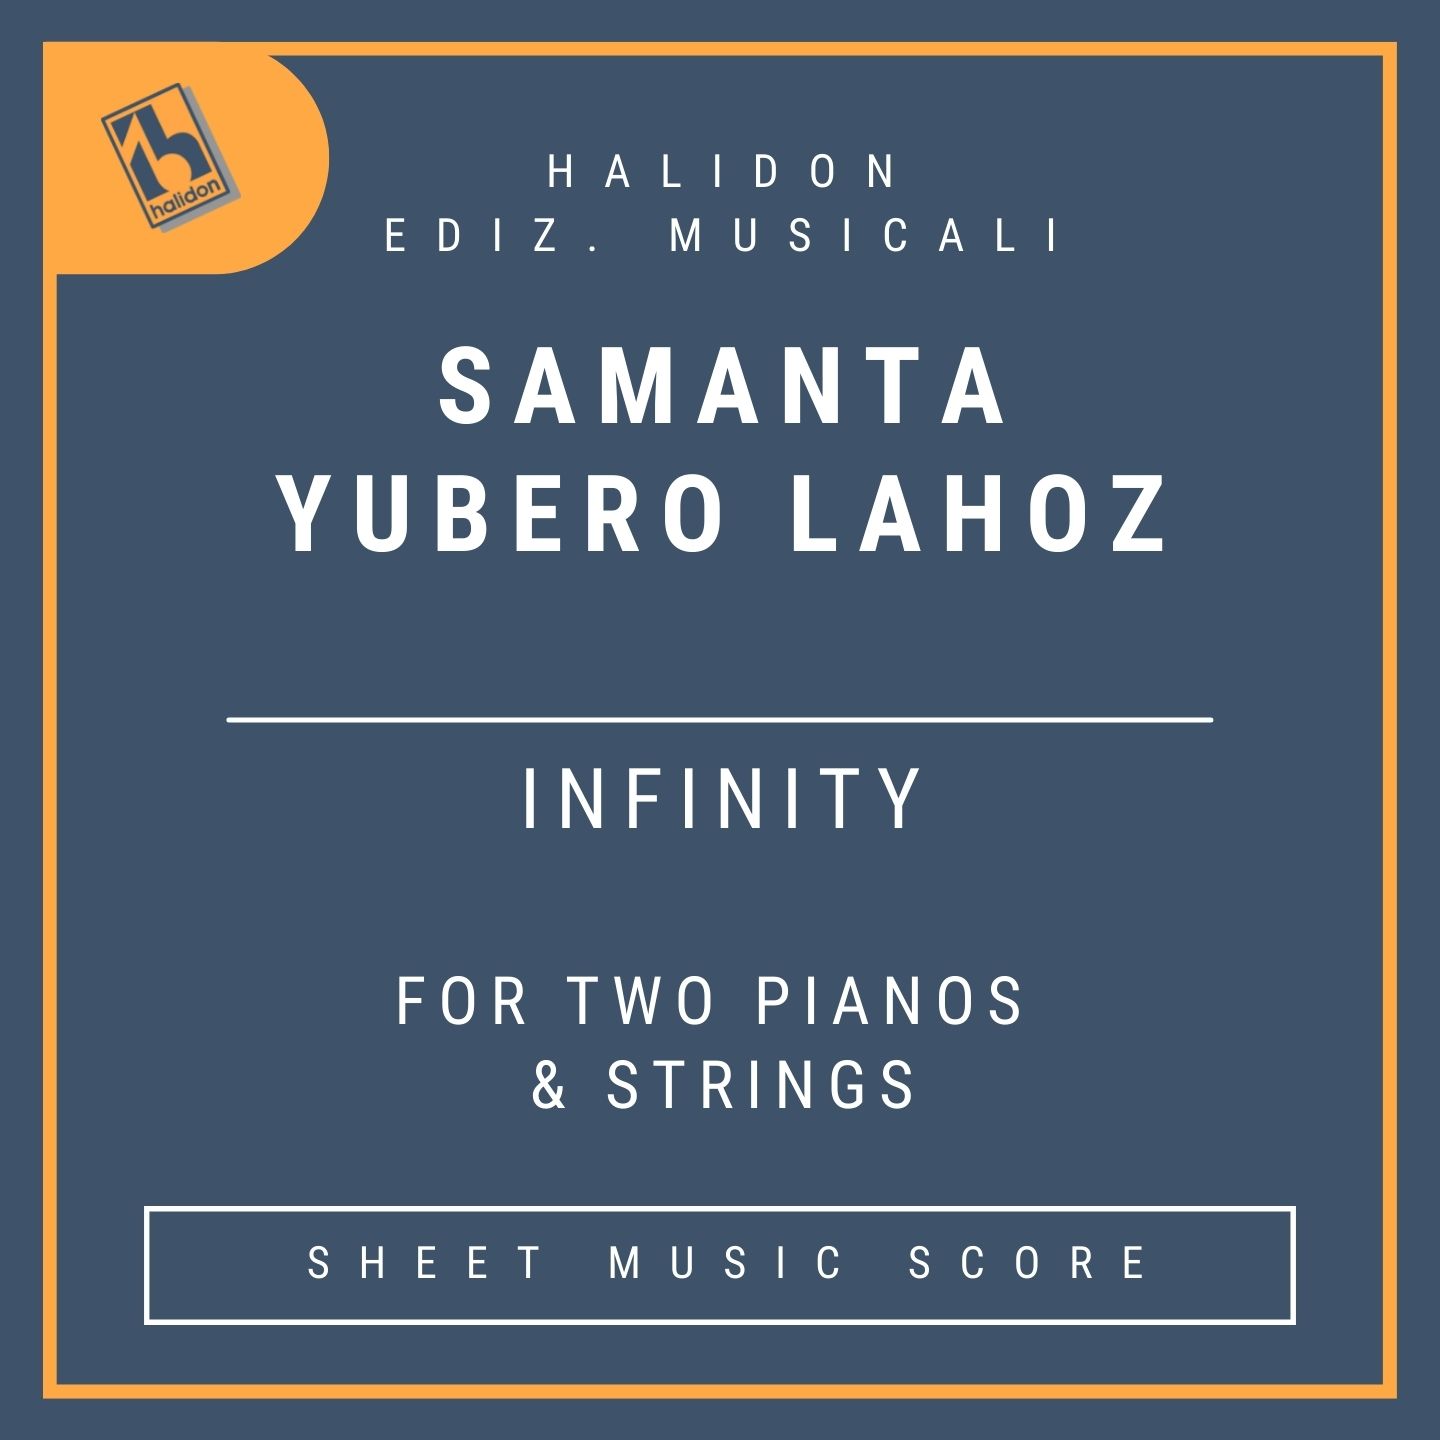 Samanta Yubero Lahoz - 'Infinity' for two pianos & strings (complete score)